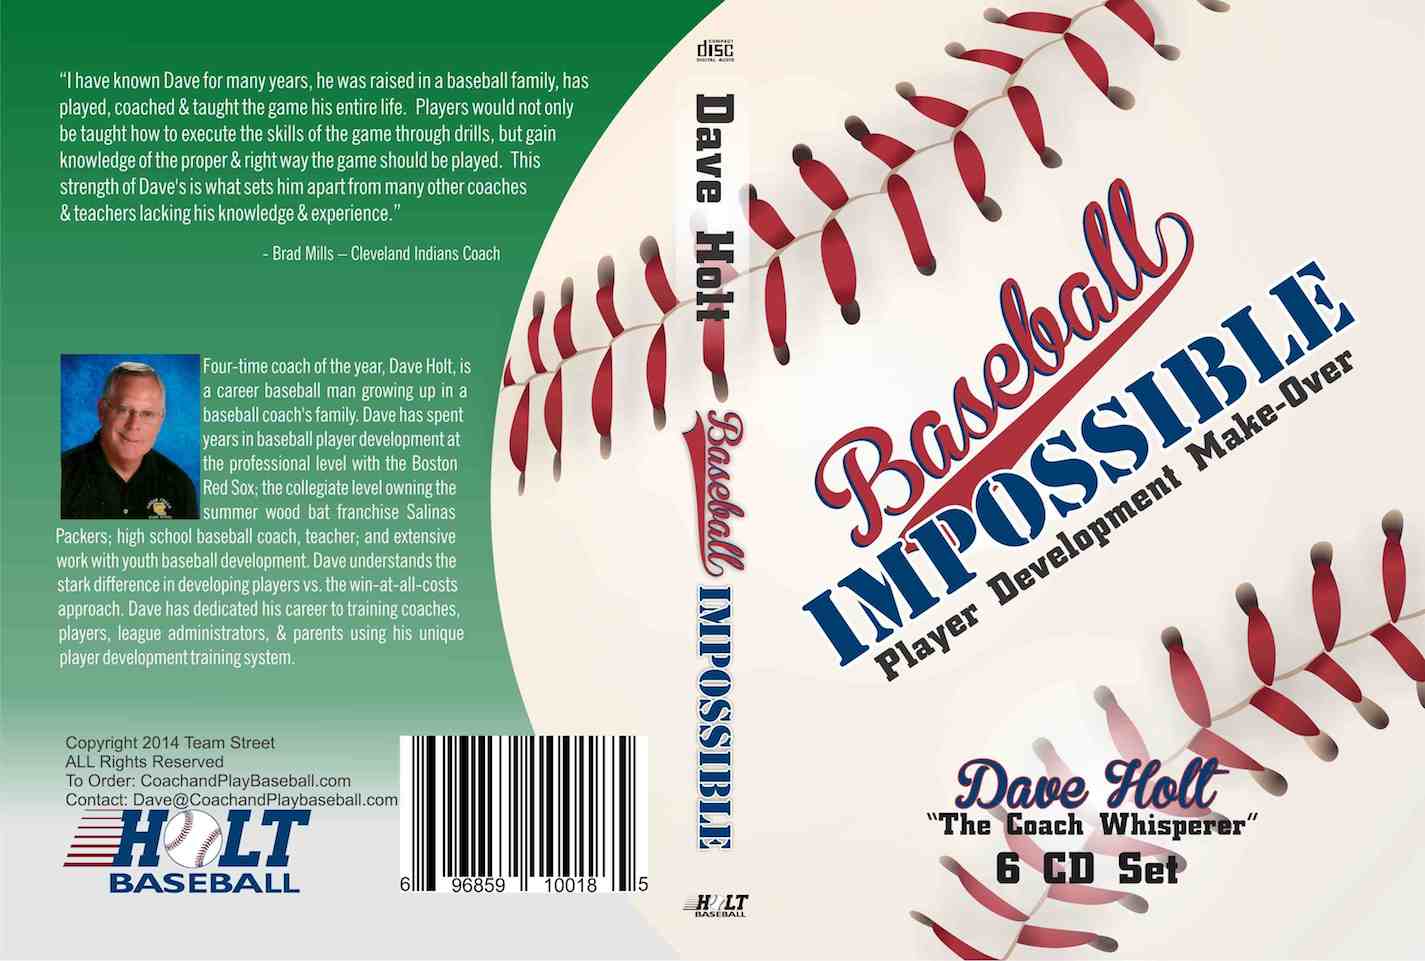 Baseball Impossible player development make over, coaching manual, tips and drills, practice planning, style, and approach.